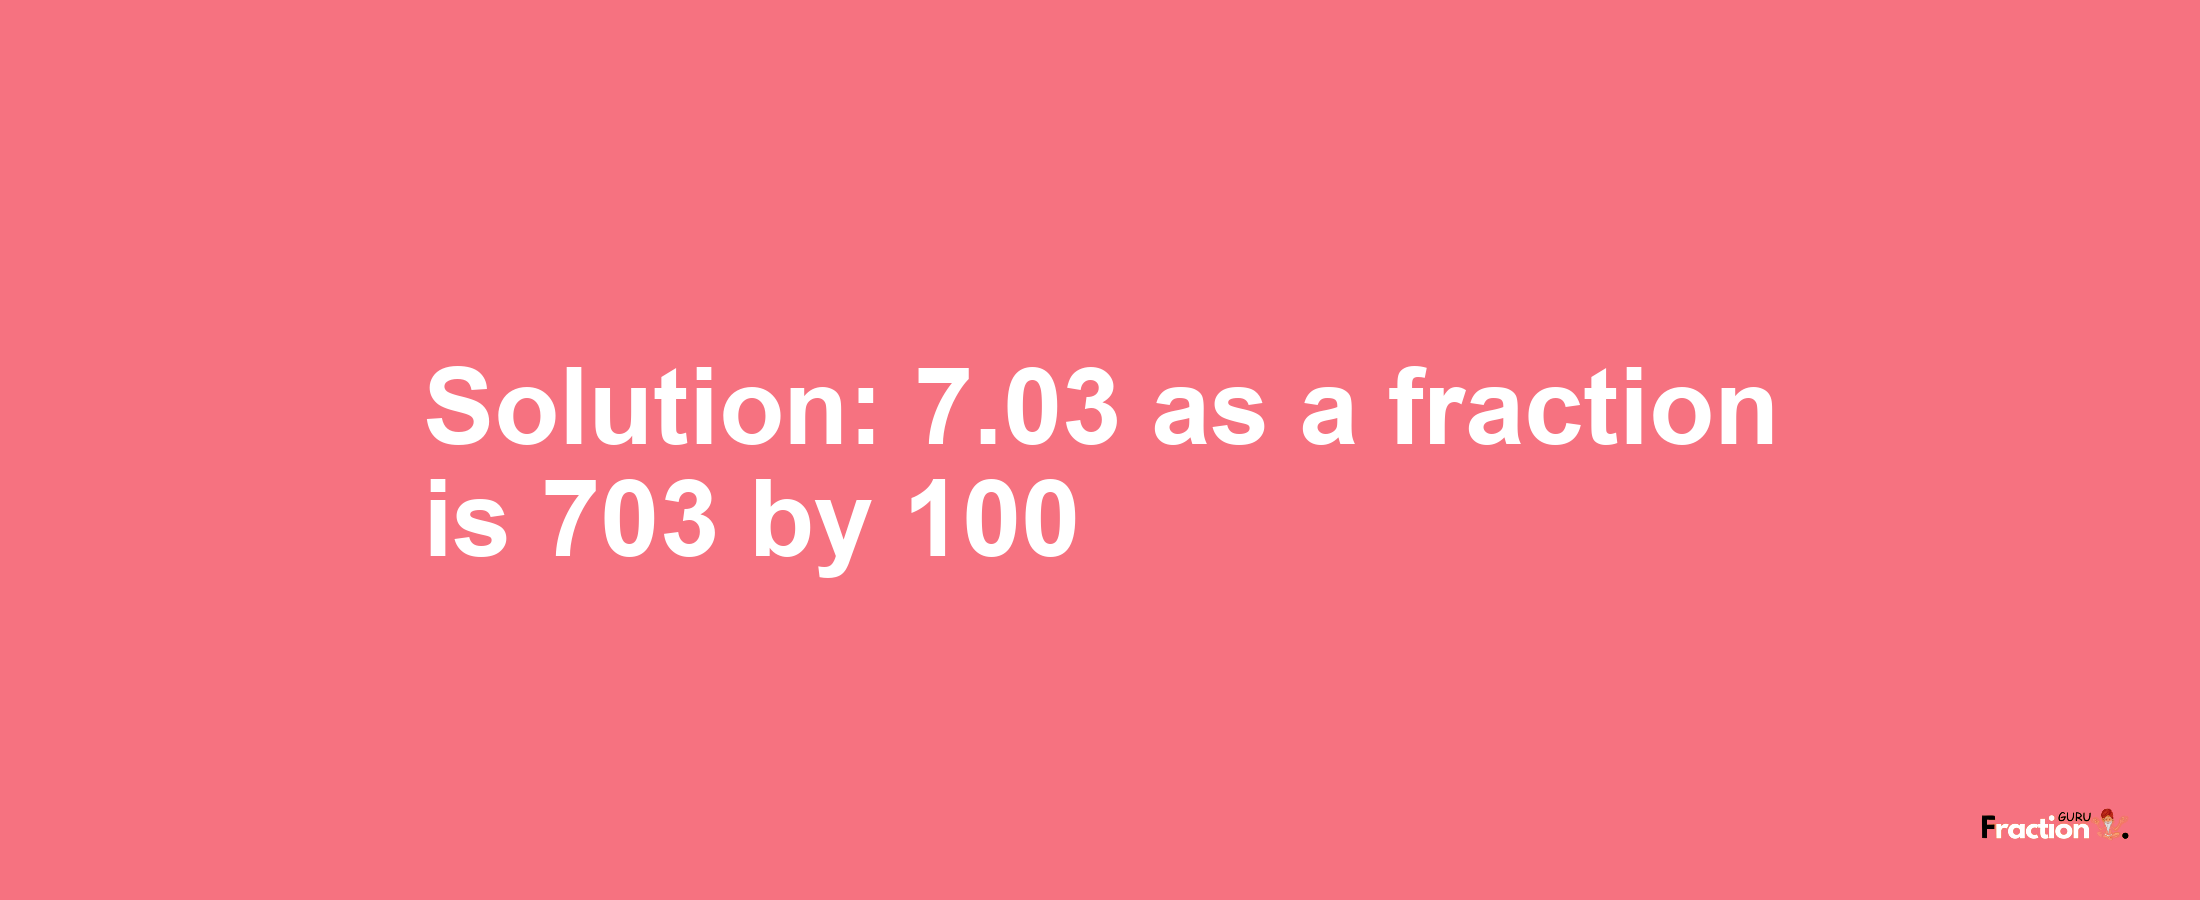 Solution:7.03 as a fraction is 703/100